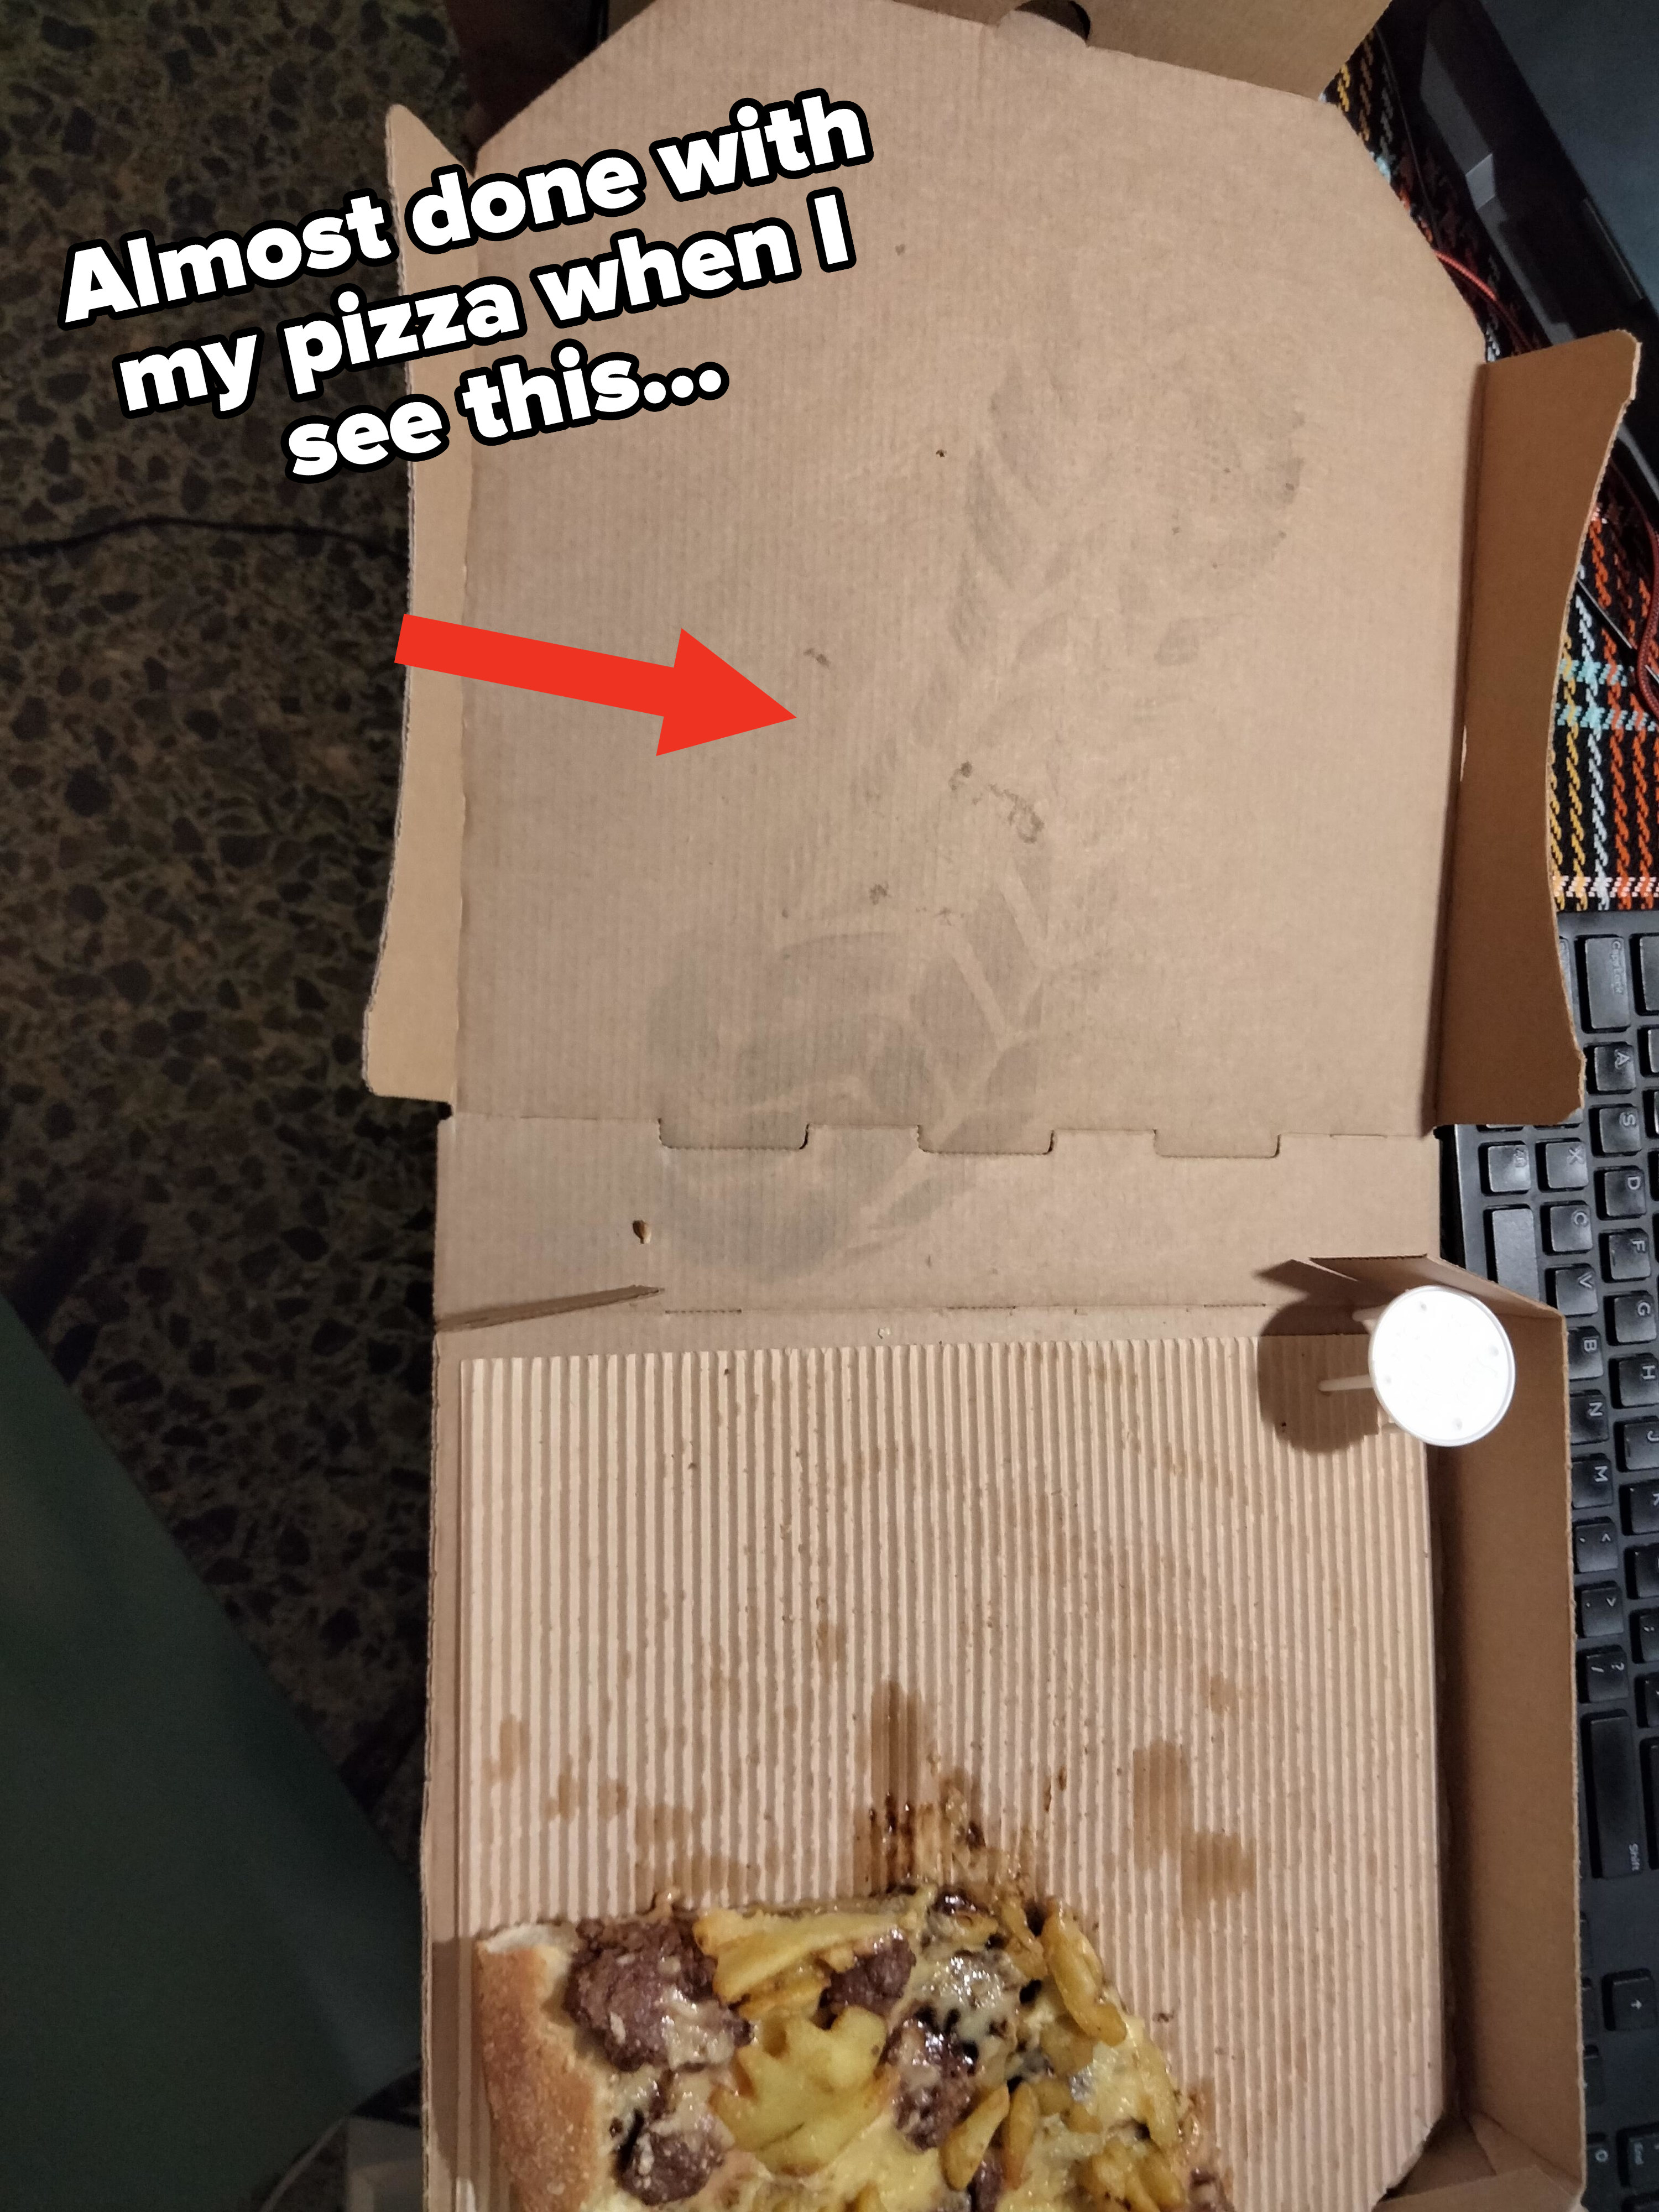 Footprint on the inside of a pizza box